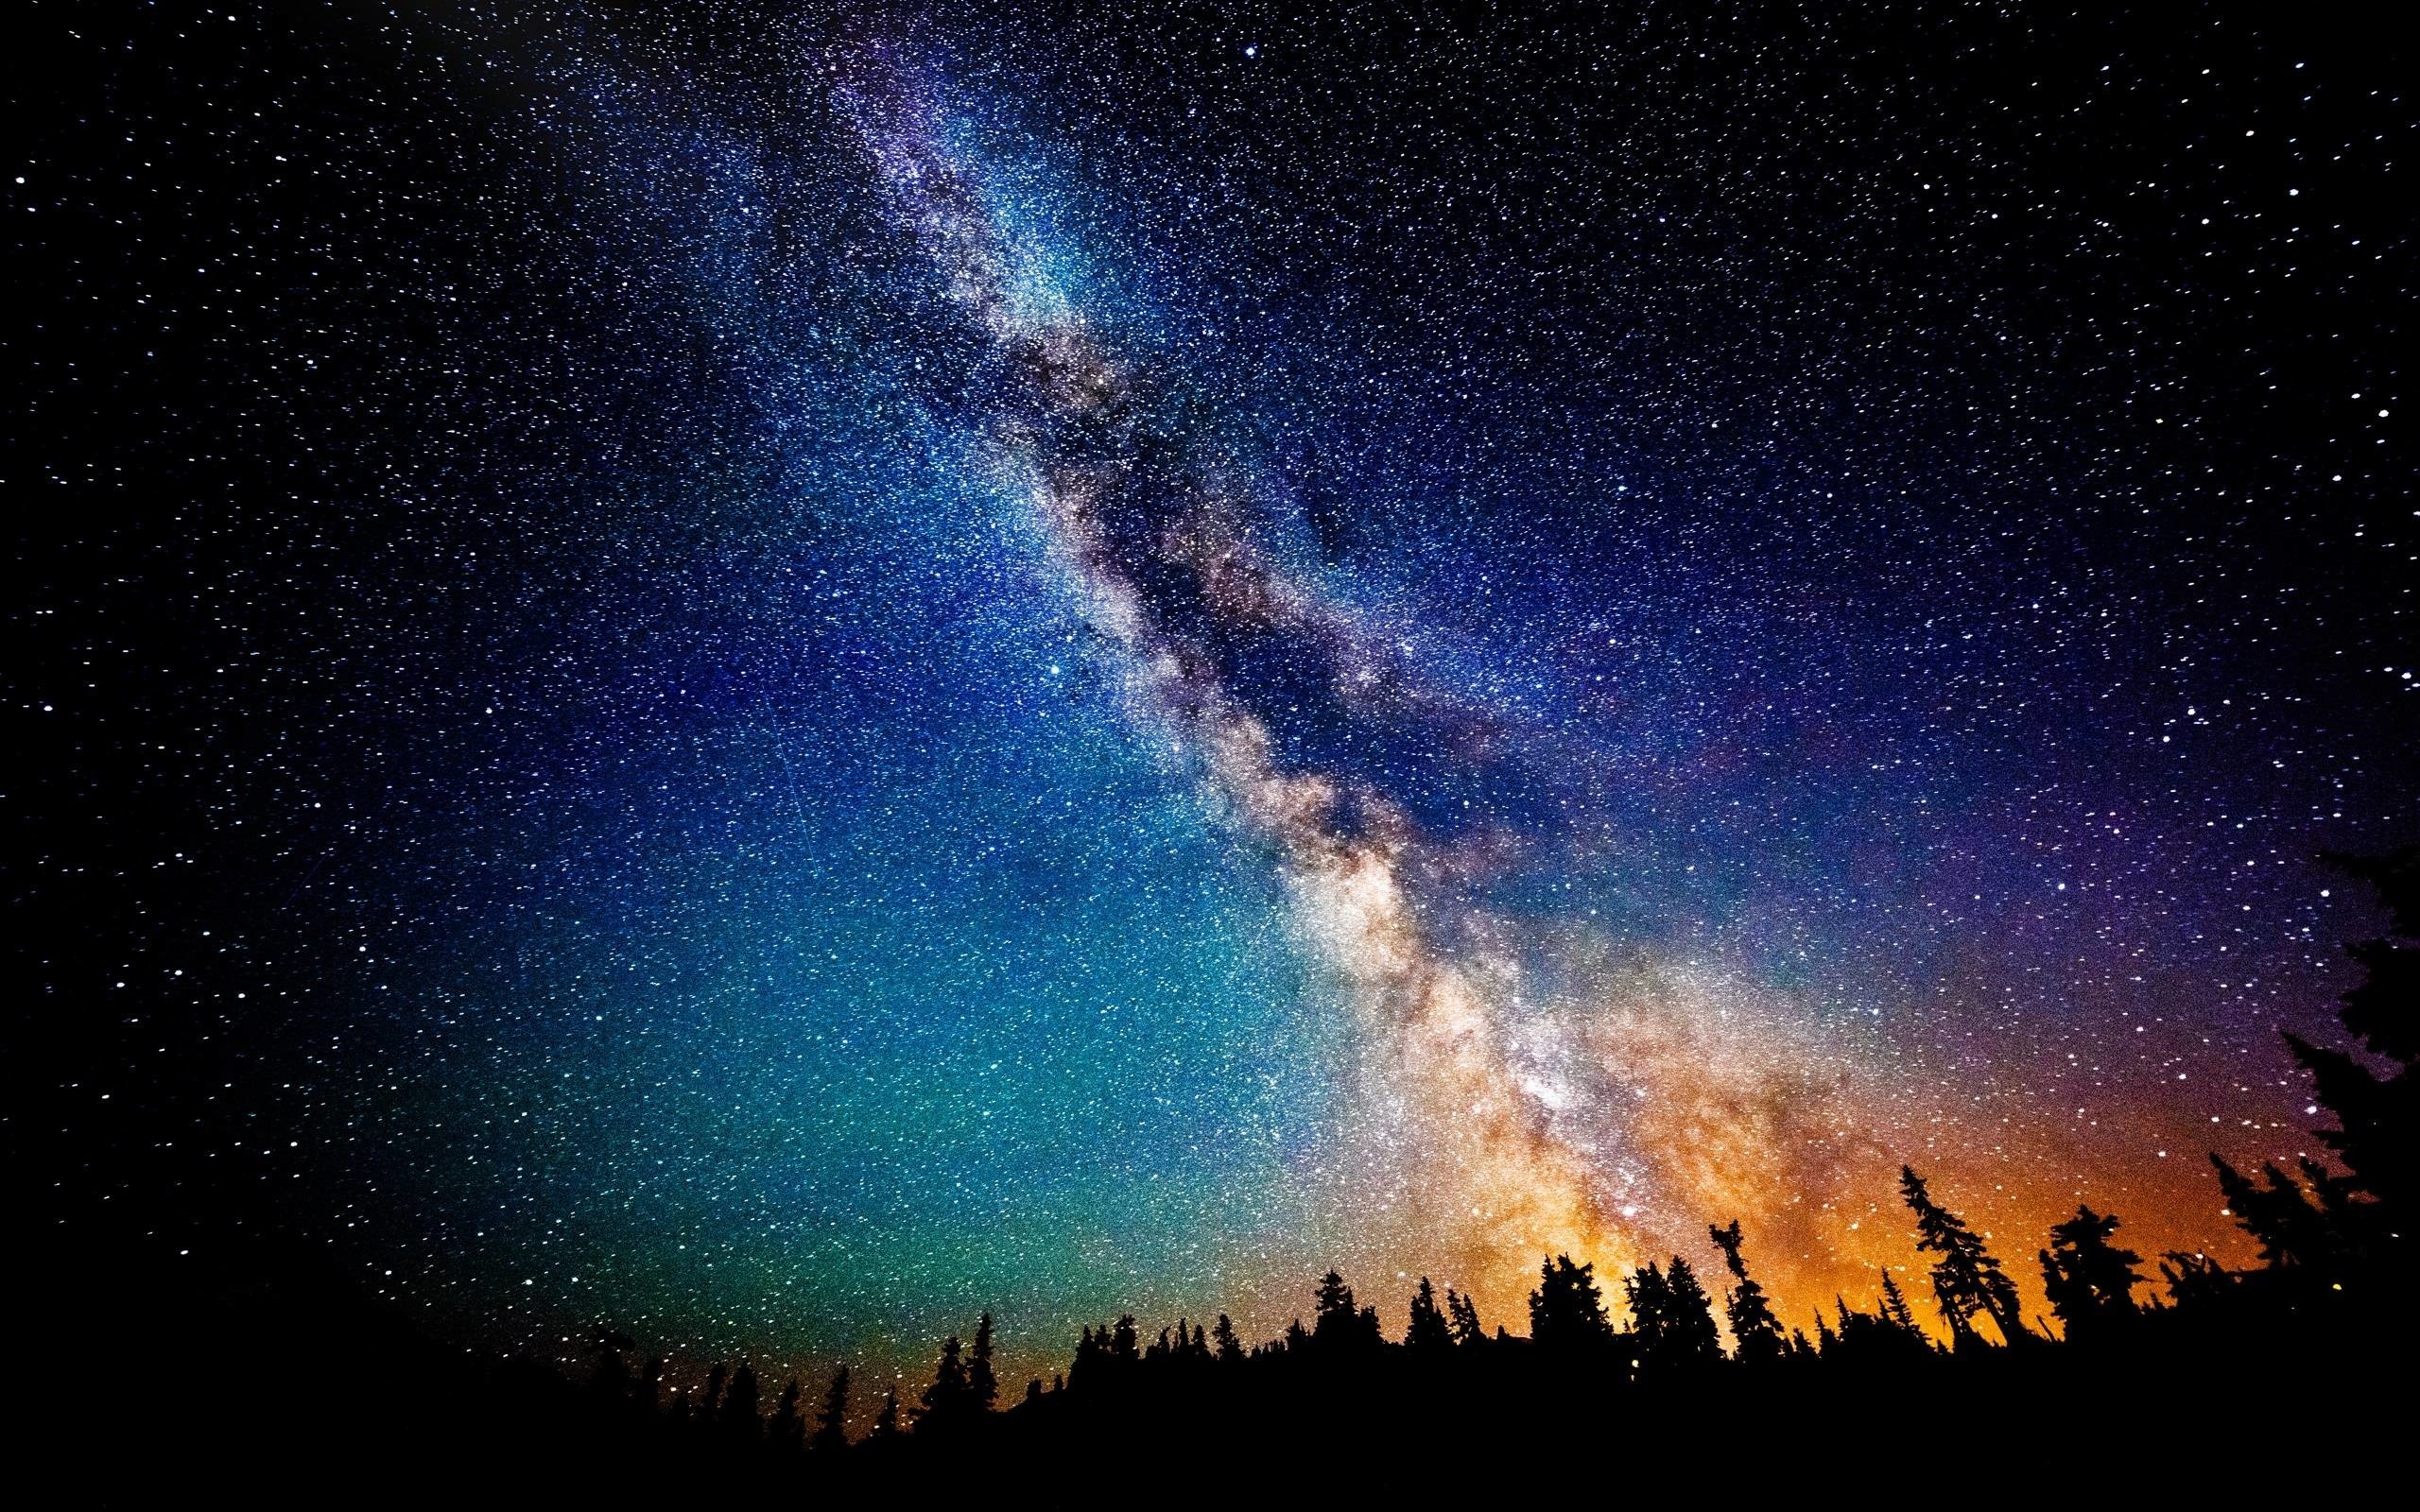 Galaxy wallpapers 1080p epic wallpaperz milky way galaxy backgrounds wallpaper cave